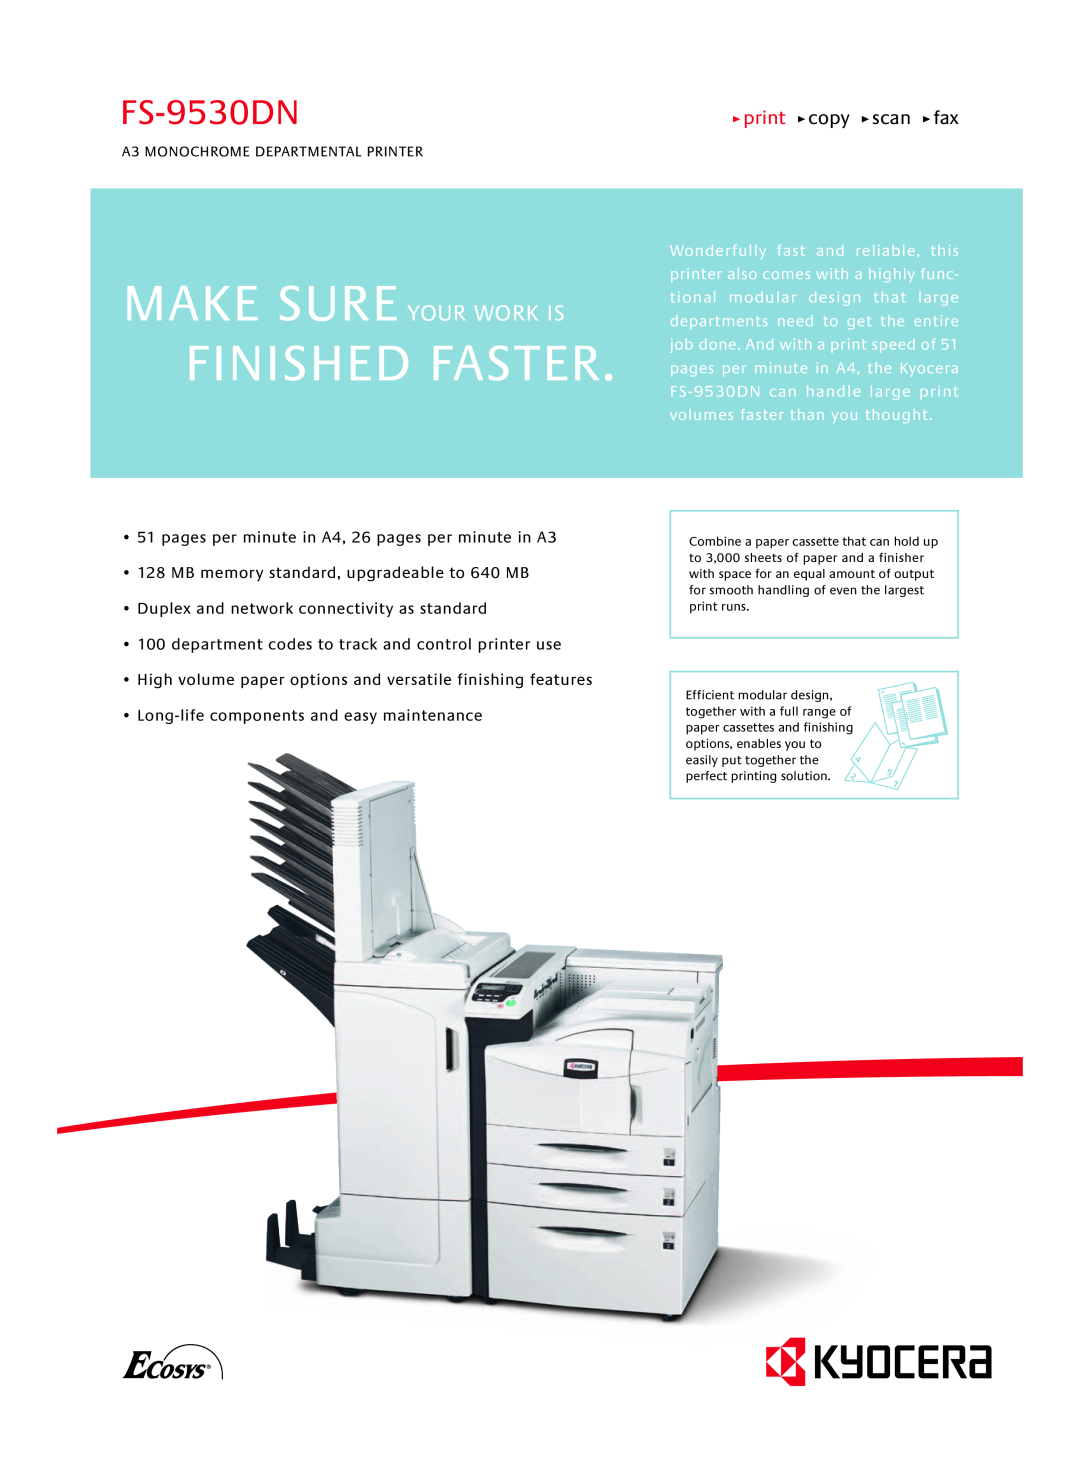 Kyocera FS-9530DN manual A3 MONOCHROME DEPARTMENTAL PRINTER, Finished Faster, Make Sure Your Work Is, print copy scan fax 